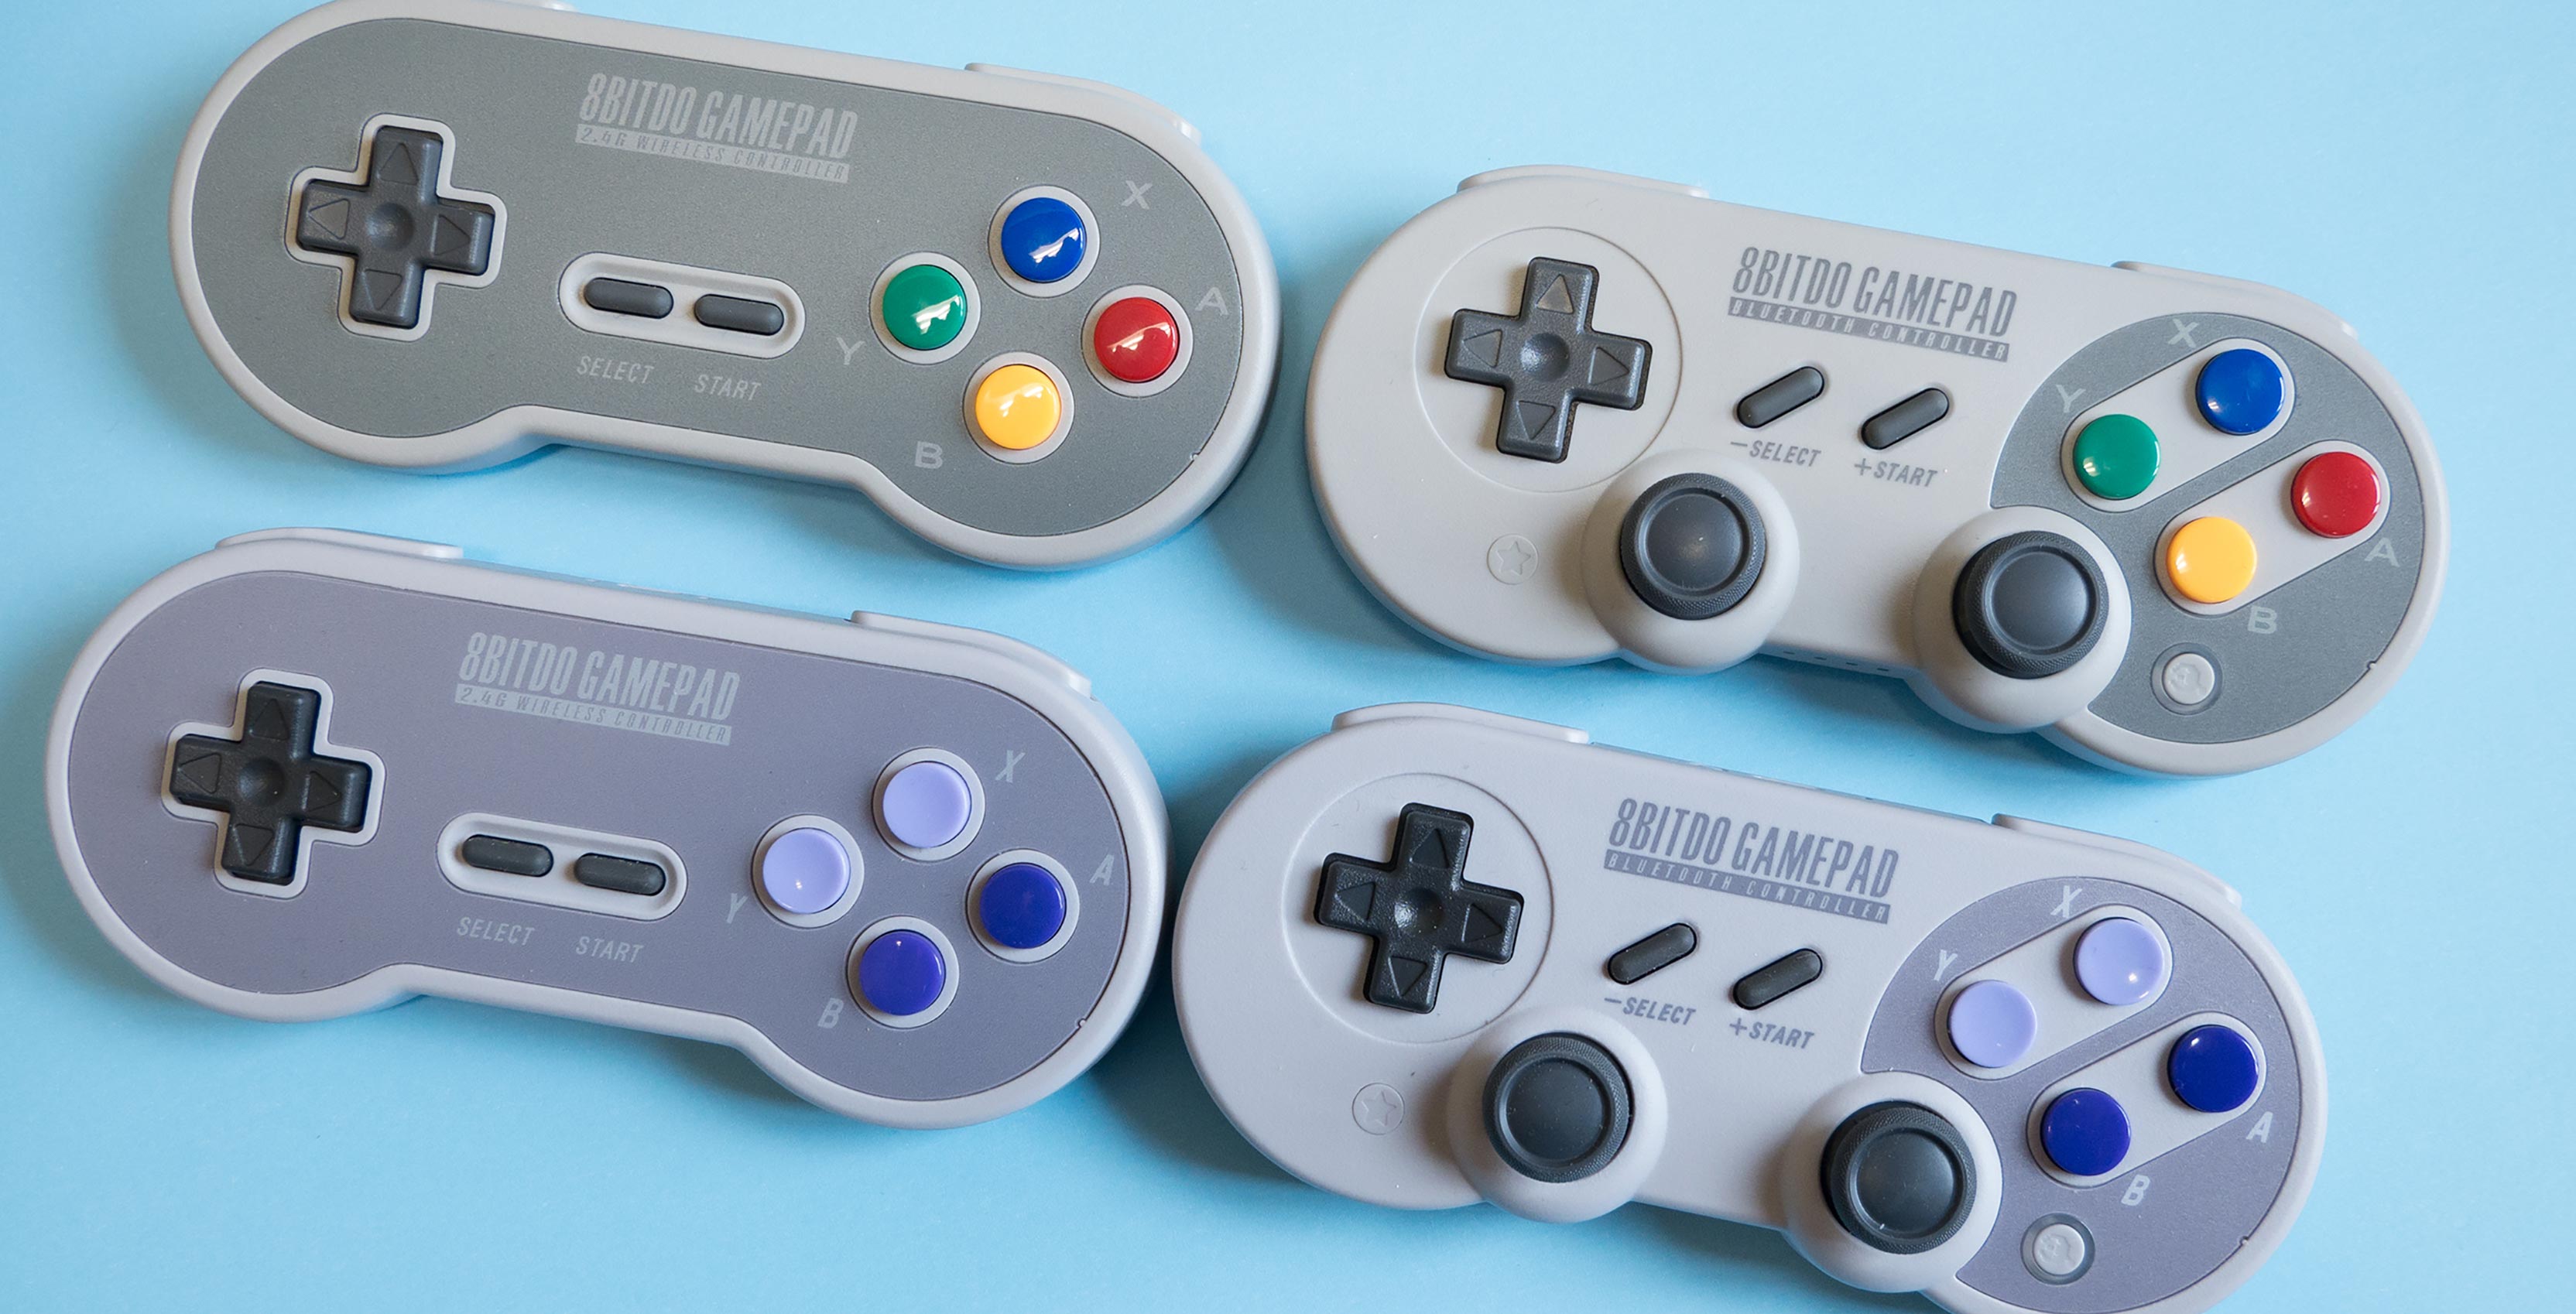 8bitdo SN30 Pro review: A Super Nintendo-inspired controller for the PC